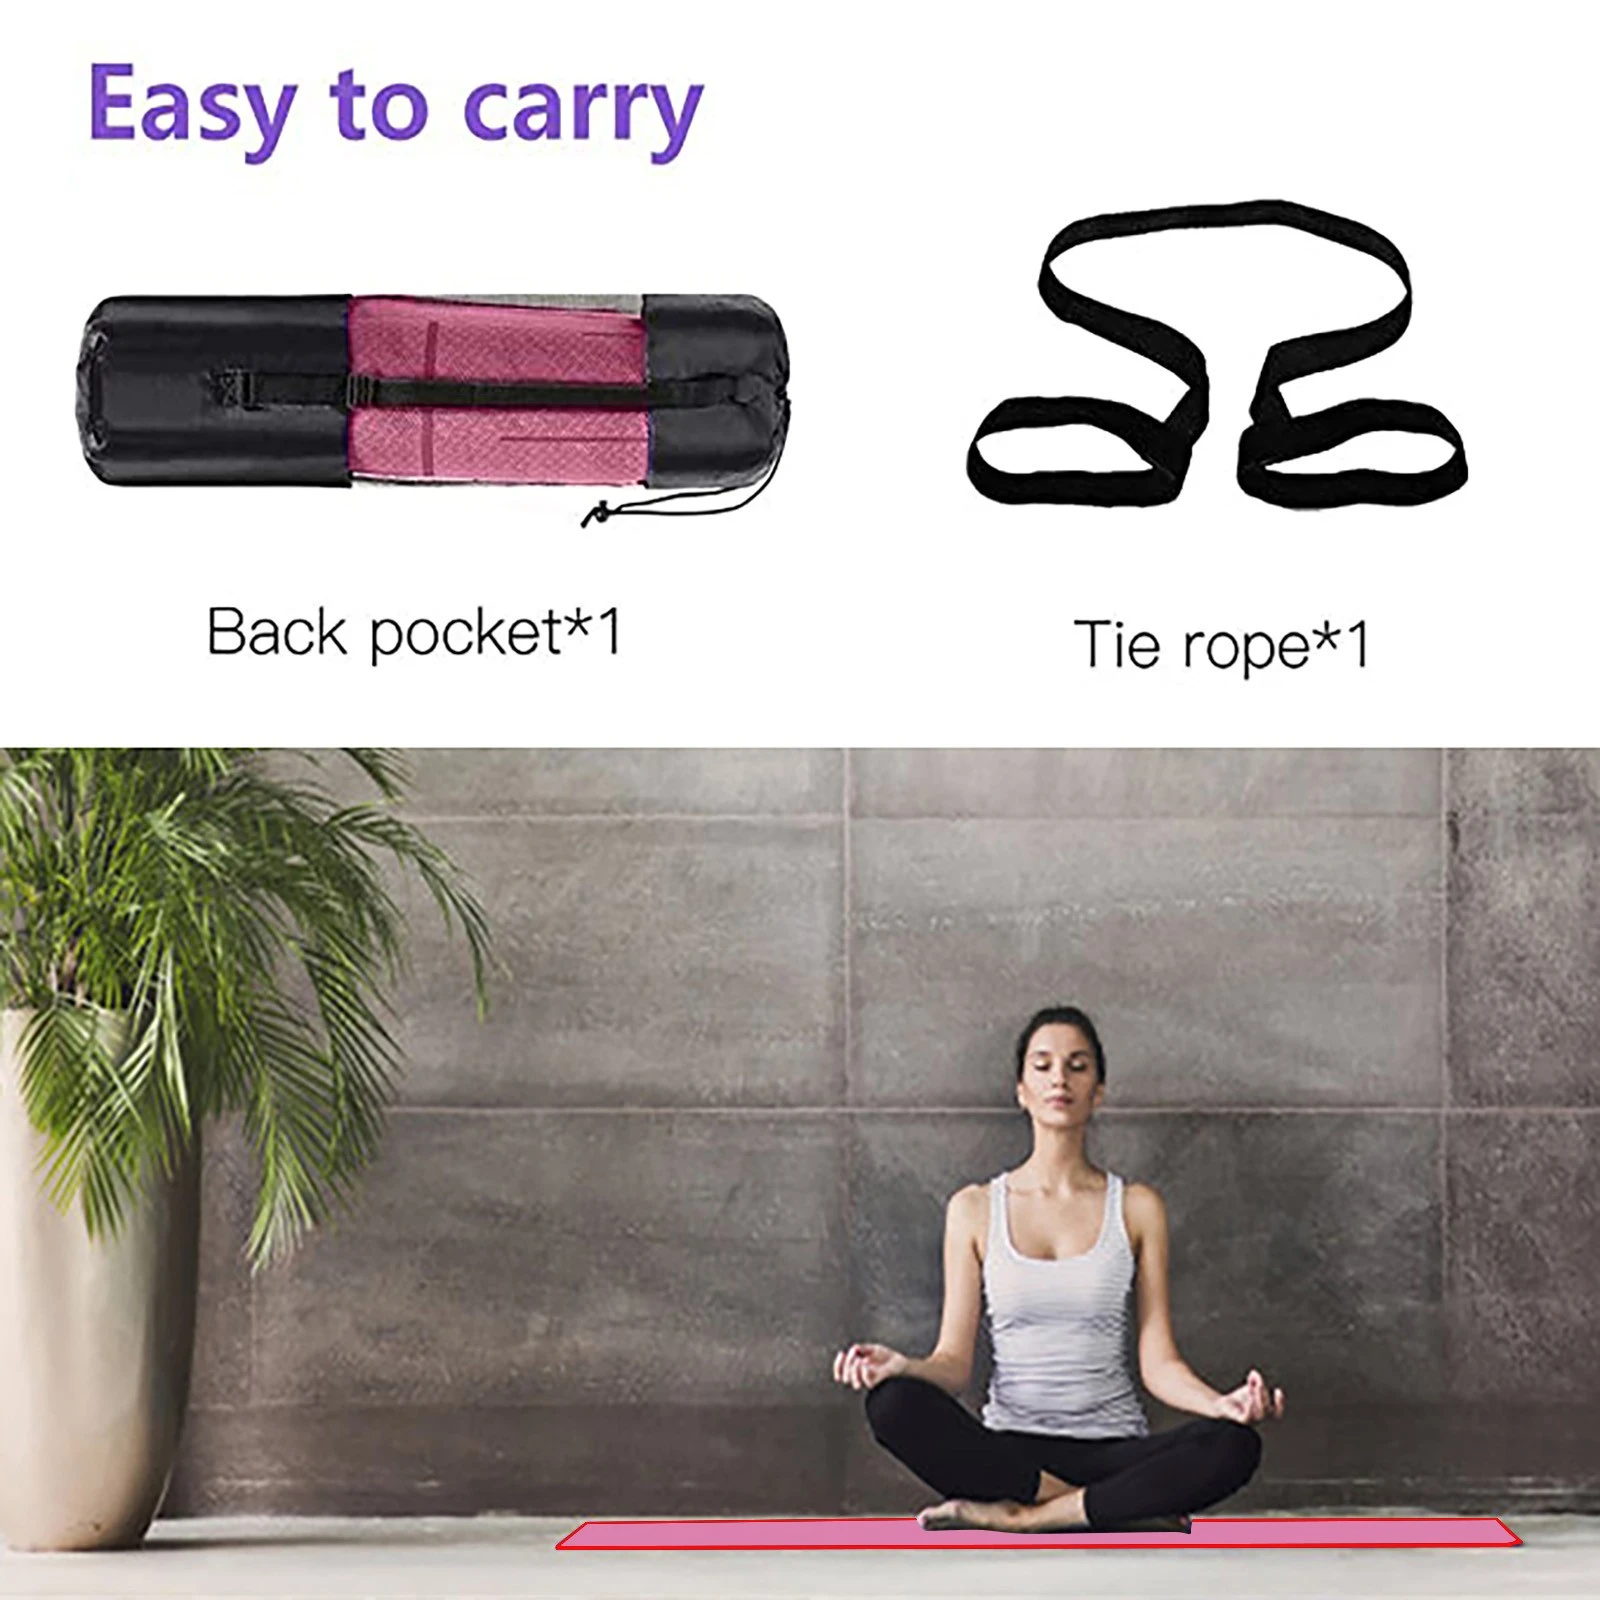 Blaast op Medaille water For Non-slip Mat Mat Mat Thick Fitness With Bag Extra Carry Yoga Sports  Waterproof Yoga Fitness & Yoga Equipment #t2g - Elastoplast - AliExpress